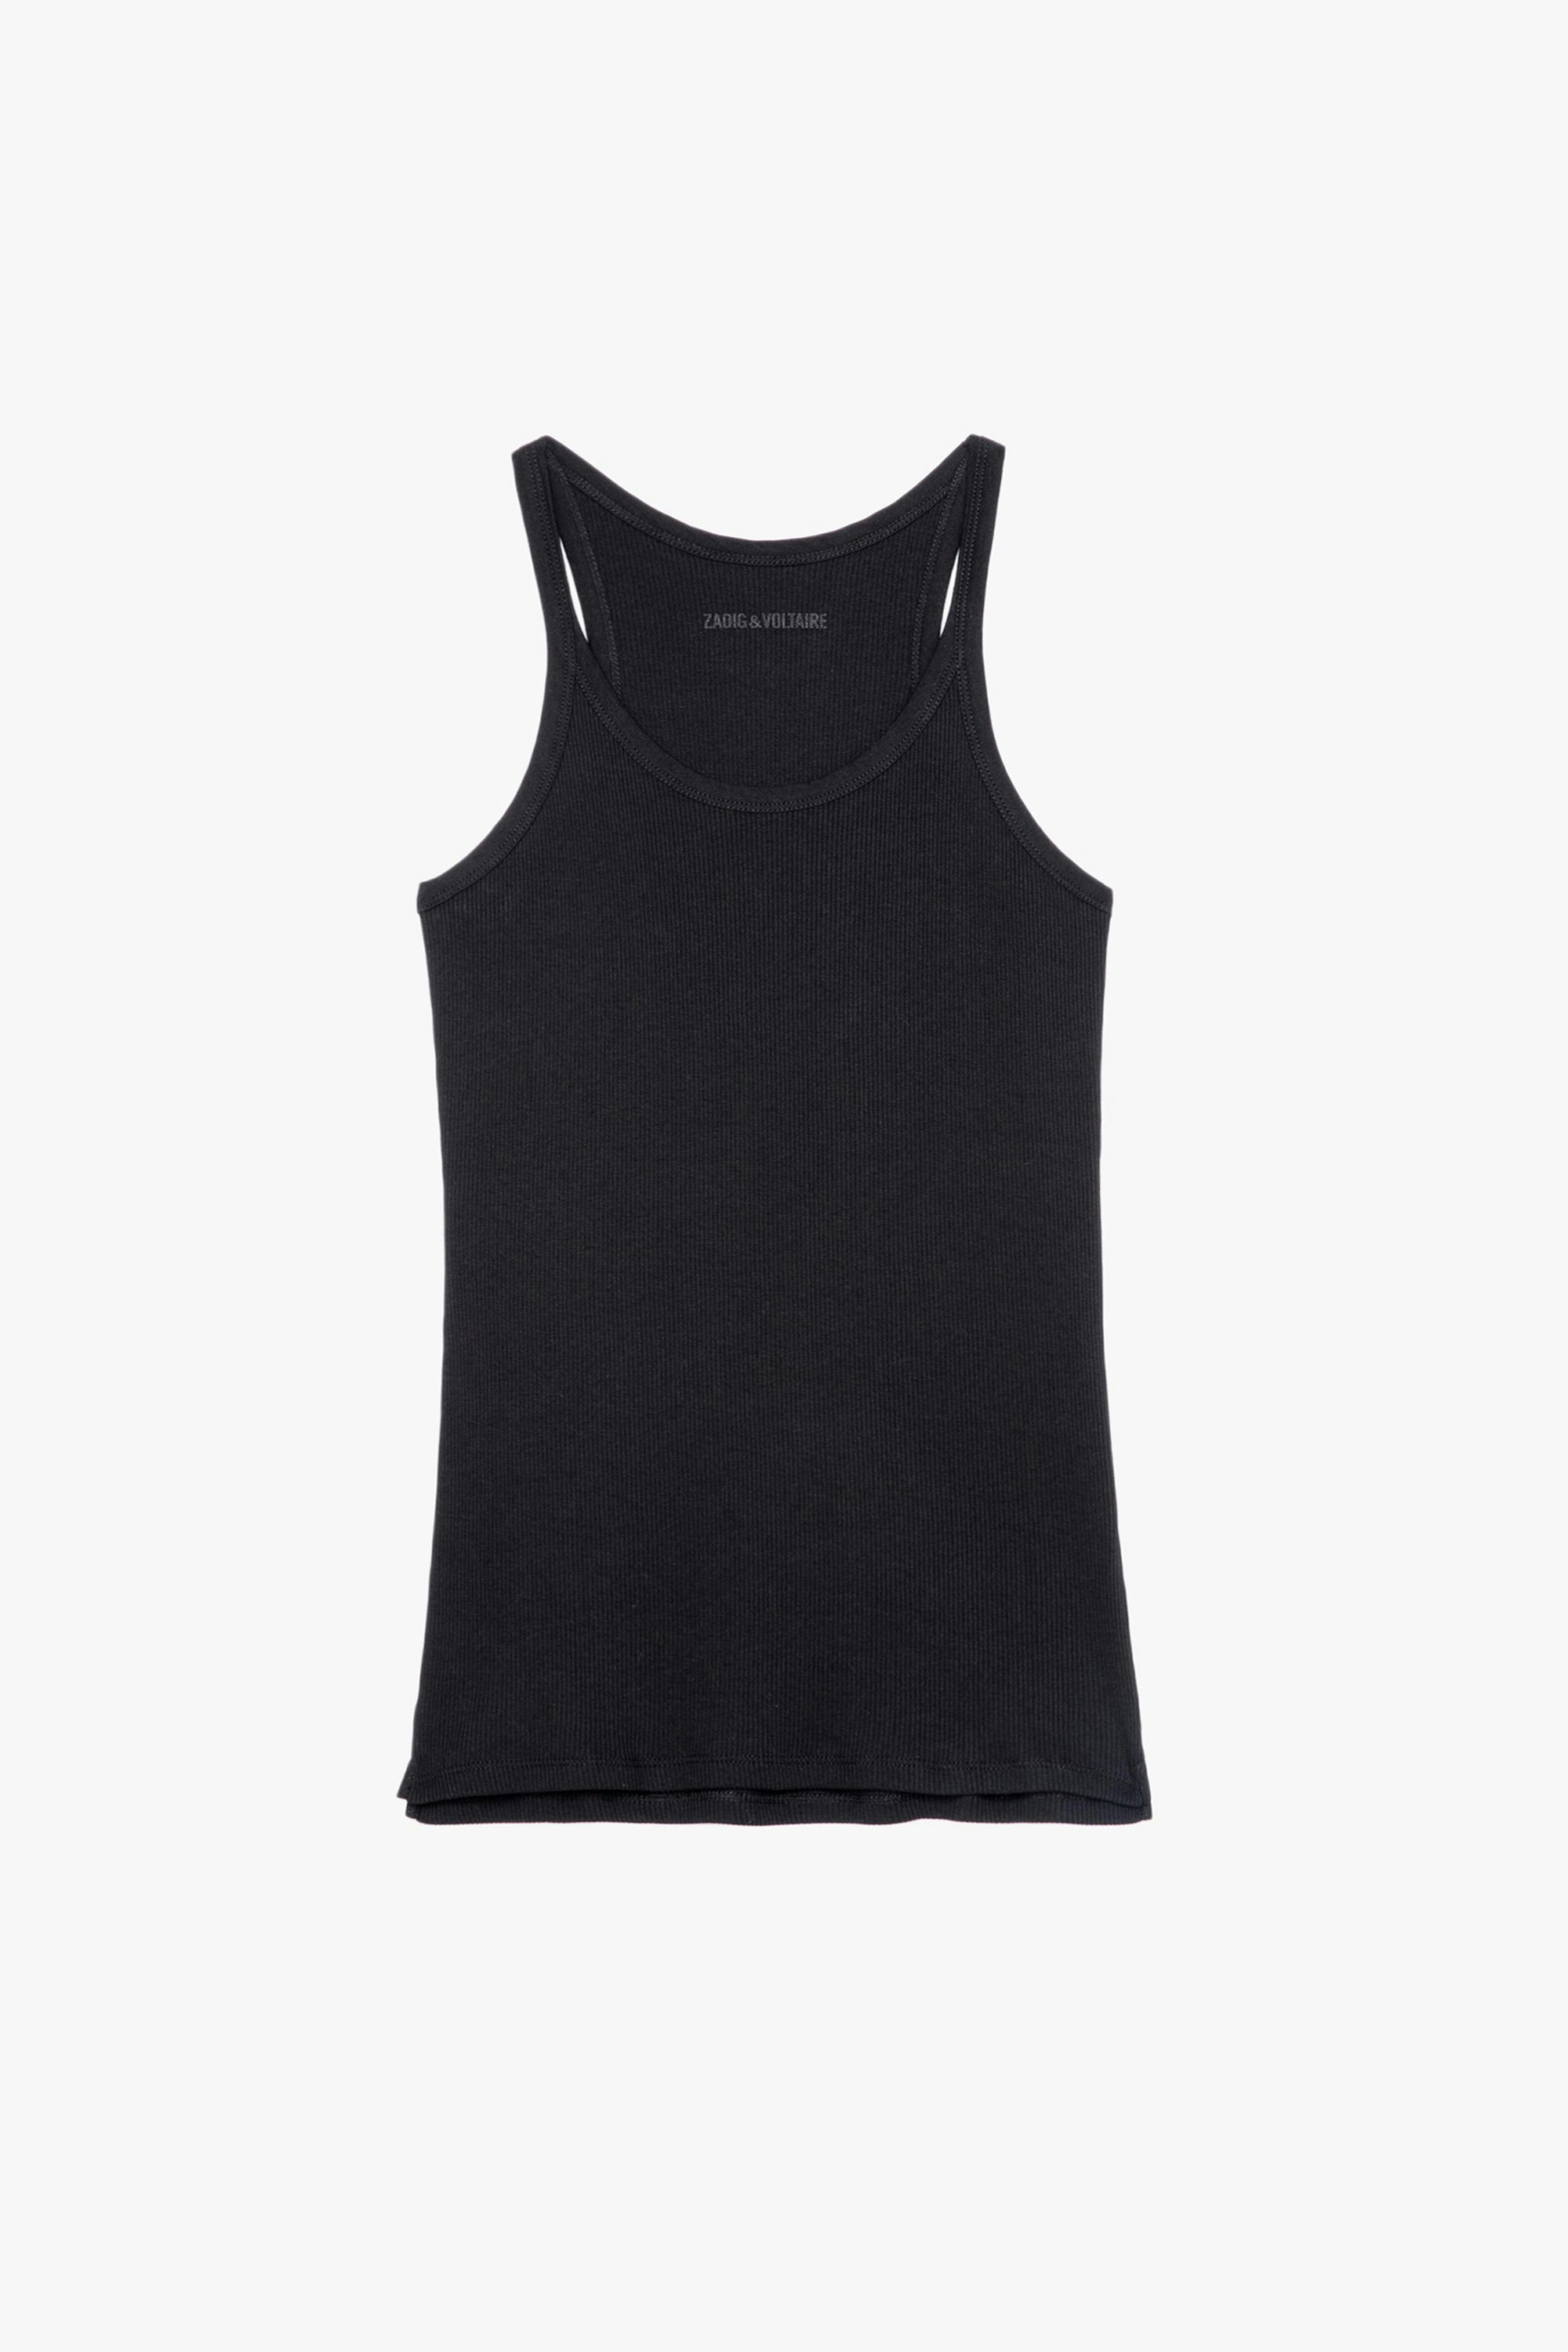 Alba Wings Tank Top - Women’s ribbed black cotton tank top with wings print on the back.